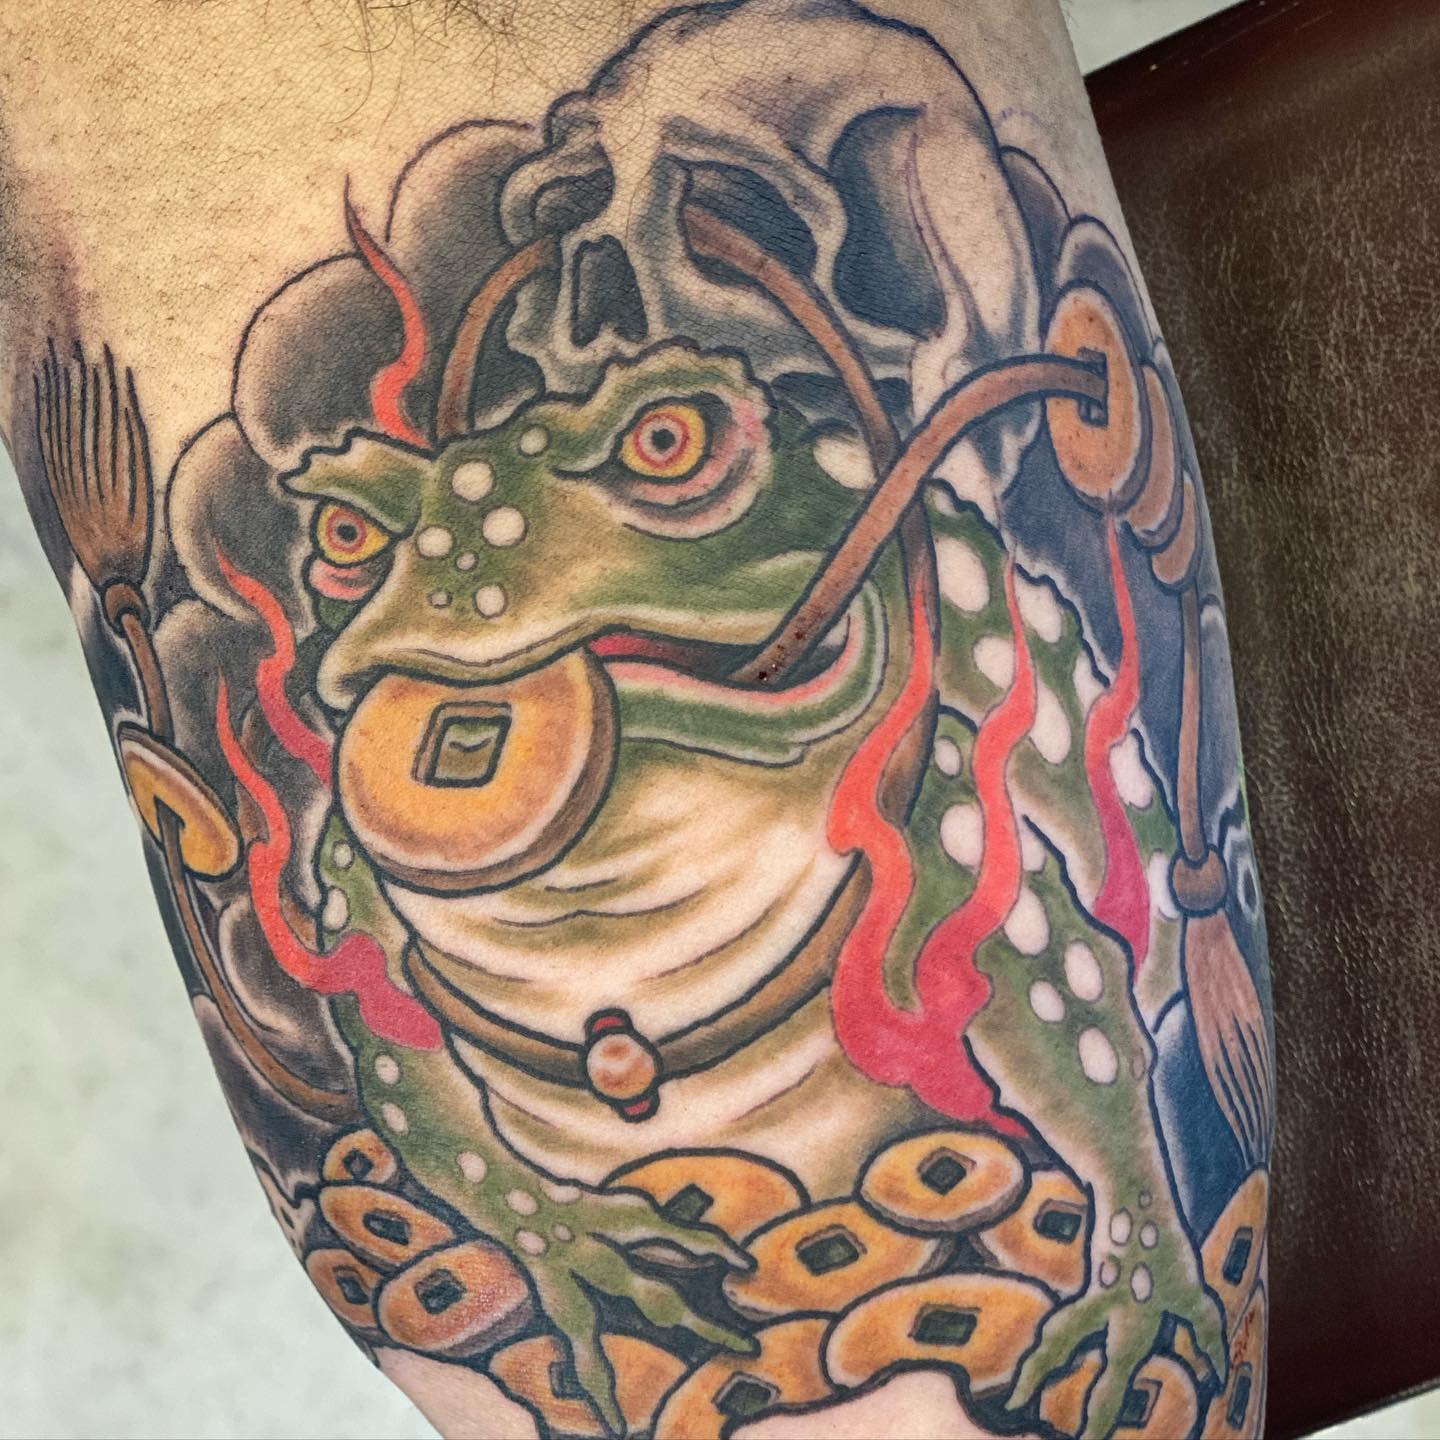 Japanese Art: The Frog and its World of Flowers and Tattoos